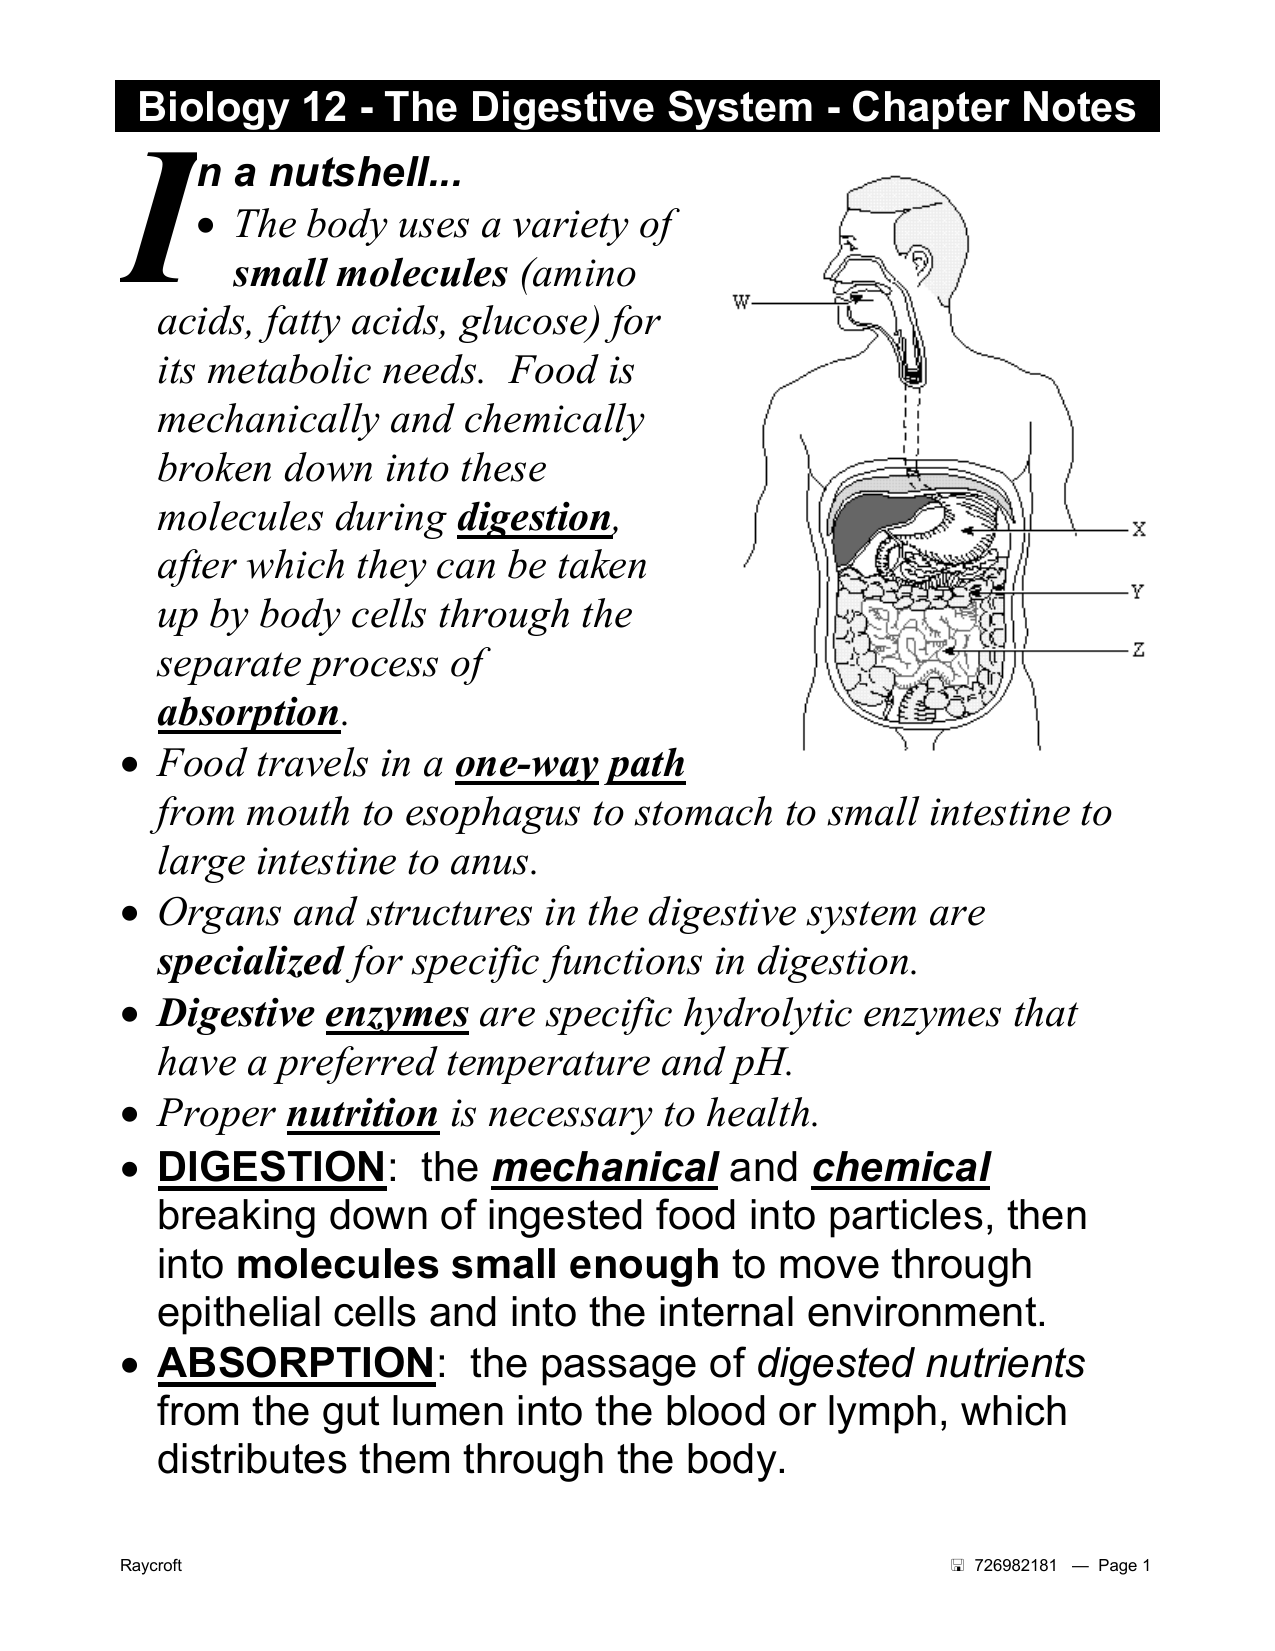 digestive system essay questions